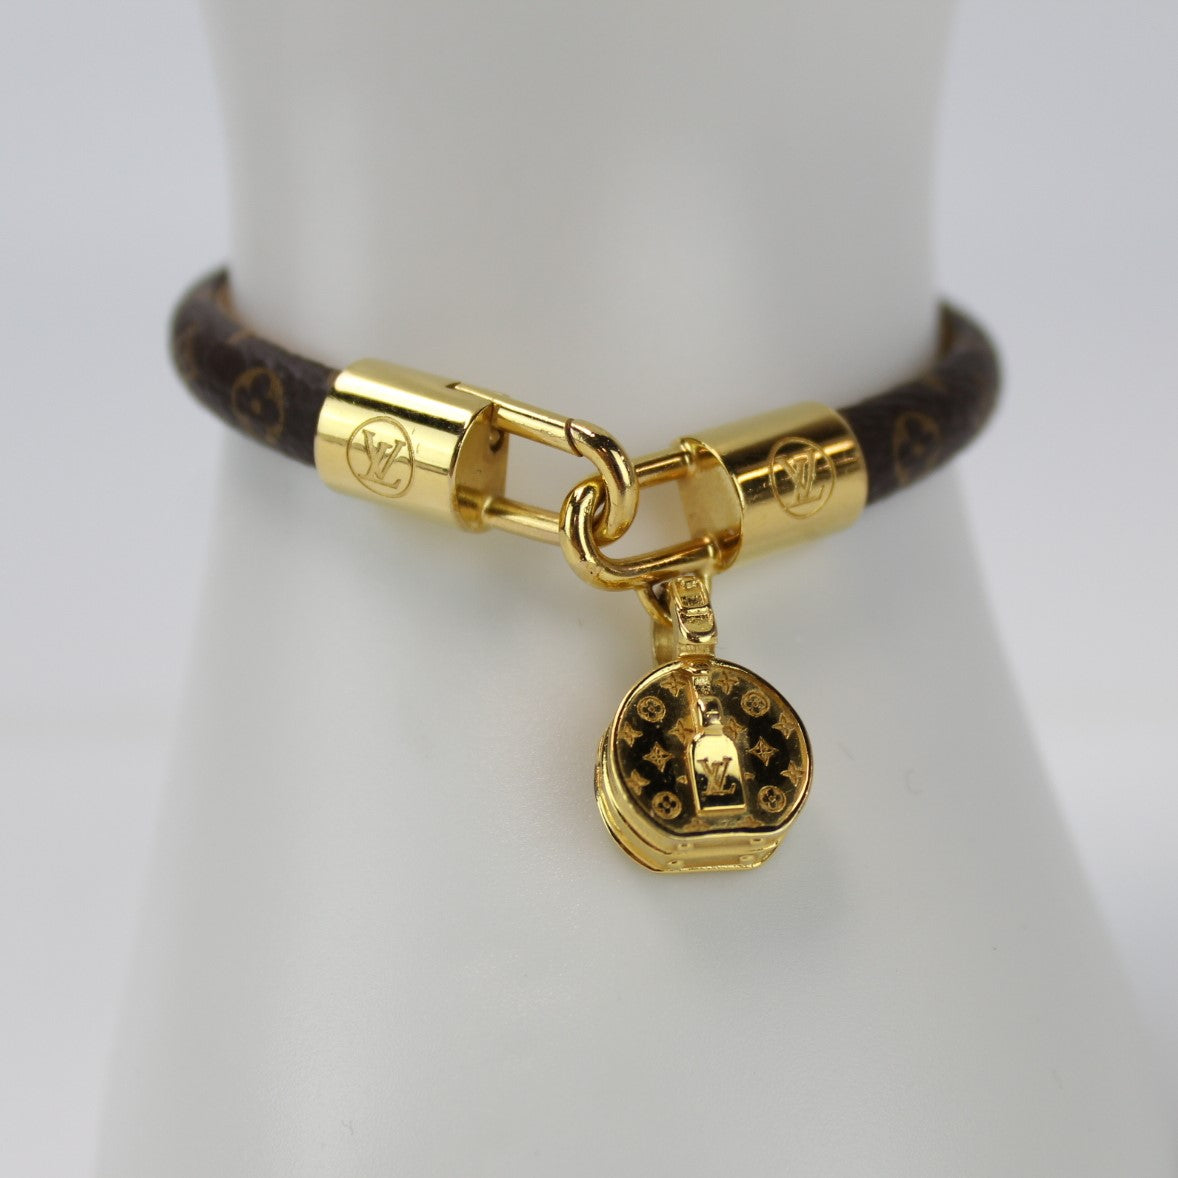 Louis Vuitton LV Logo Bracelet with Backpack Charm